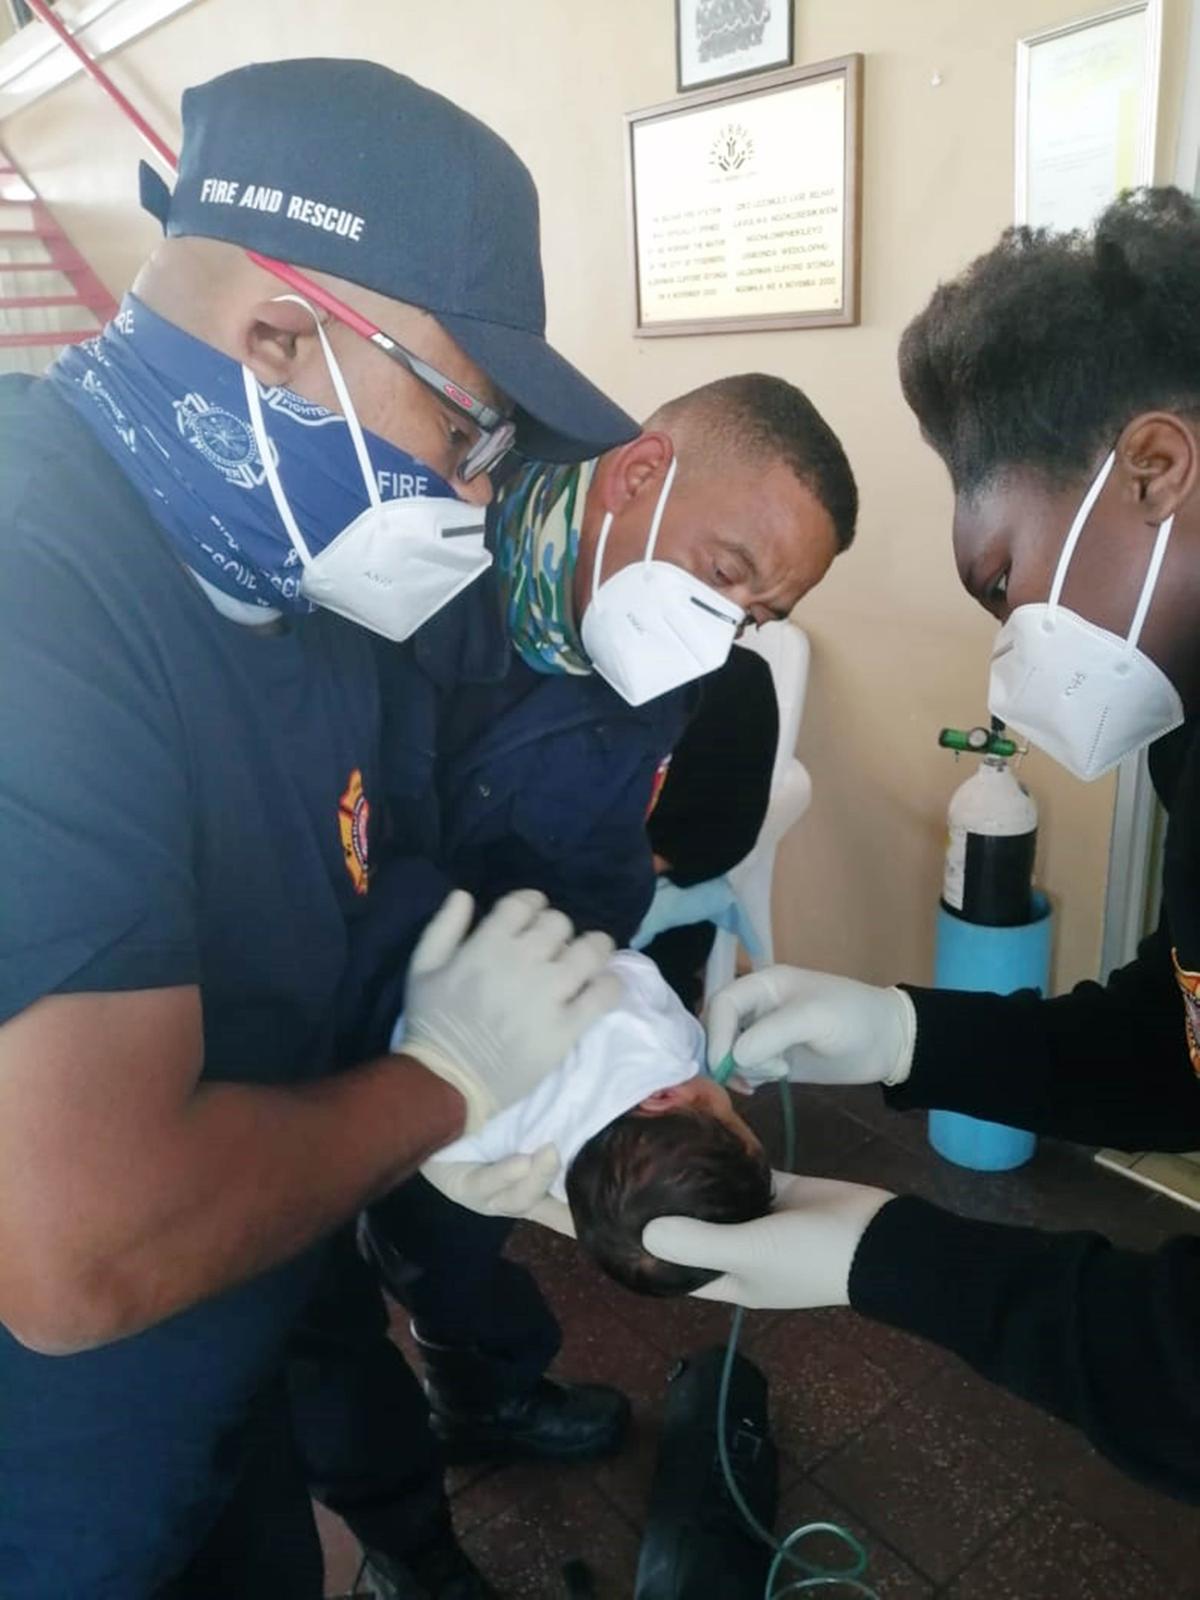  Crew members from the Belhar Fire Station try to resuscitate the two-week-old baby on Oct. 9, 2020. (Courtesy of <a href="https://www.facebook.com/CityofCT/">City of Cape Town</a>)